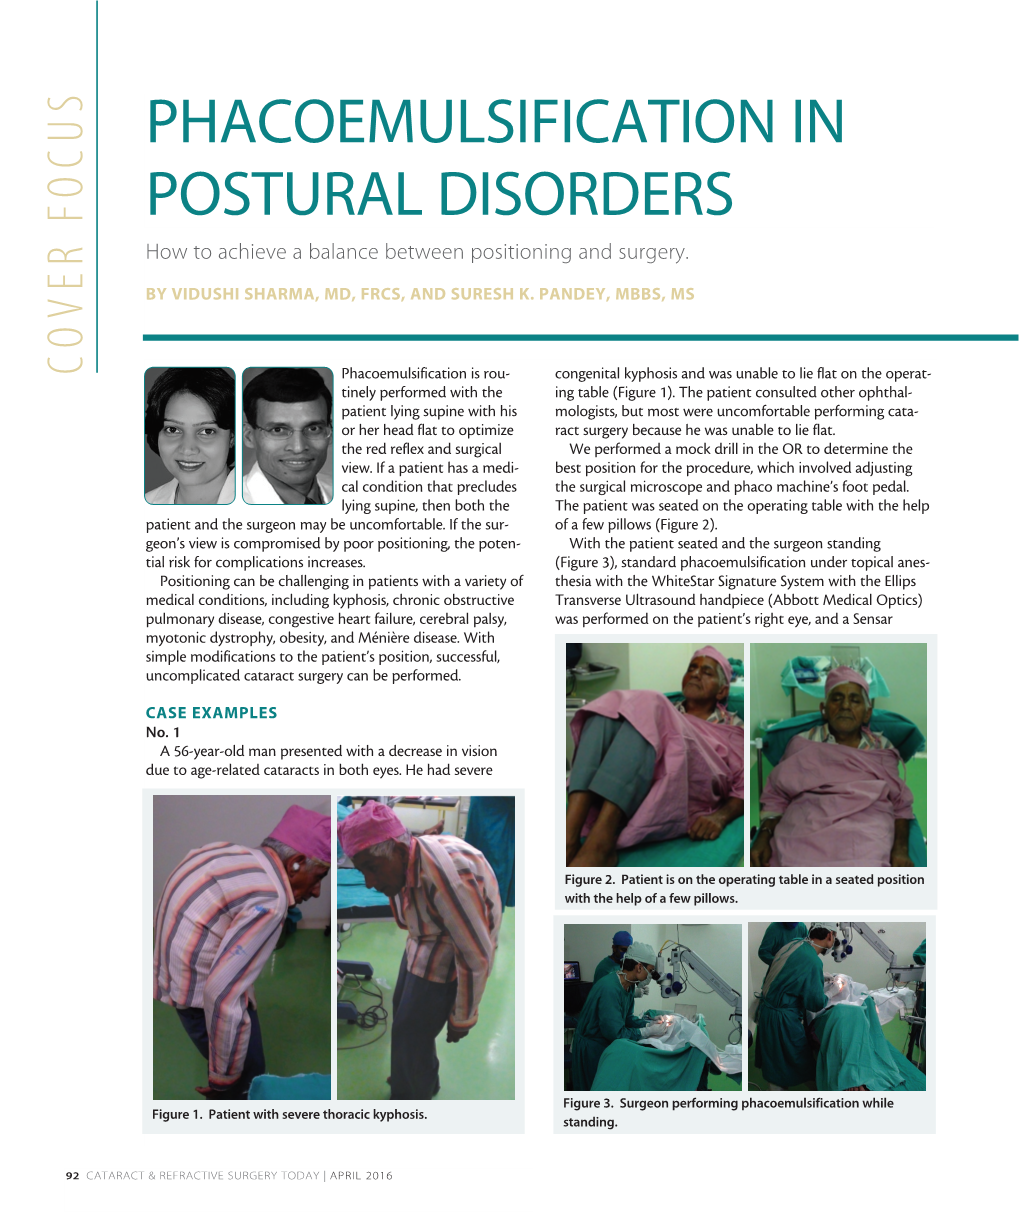 PHACOEMULSIFICATION in POSTURAL DISORDERS How to Achieve a Balance Between Positioning and Surgery